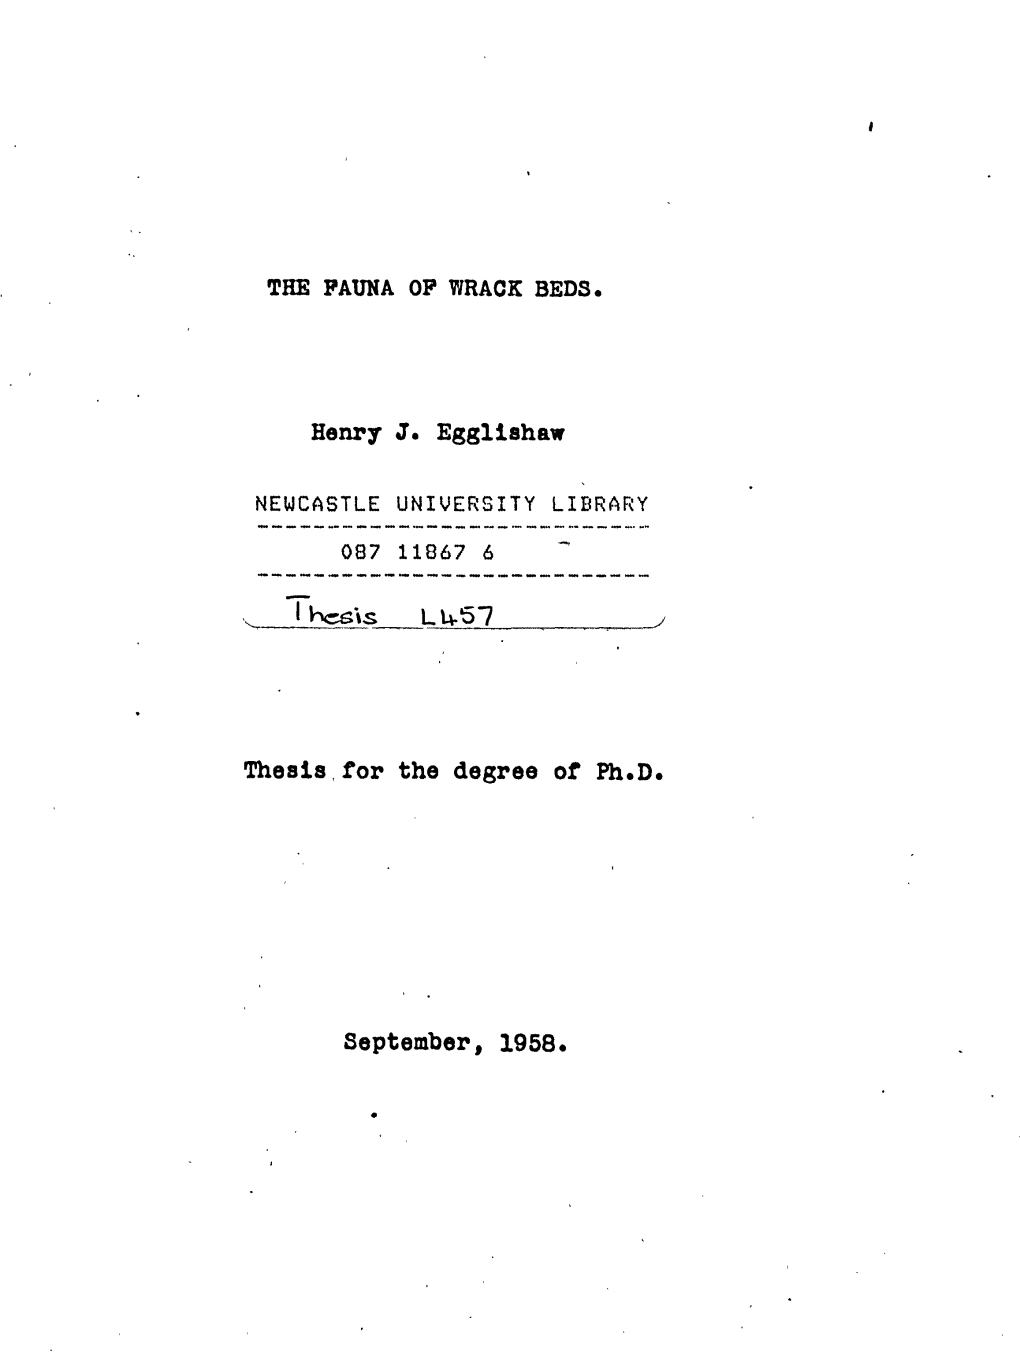 Henry J. Egglishaw Thesis, for the Degree of Ph. D. September, 1958